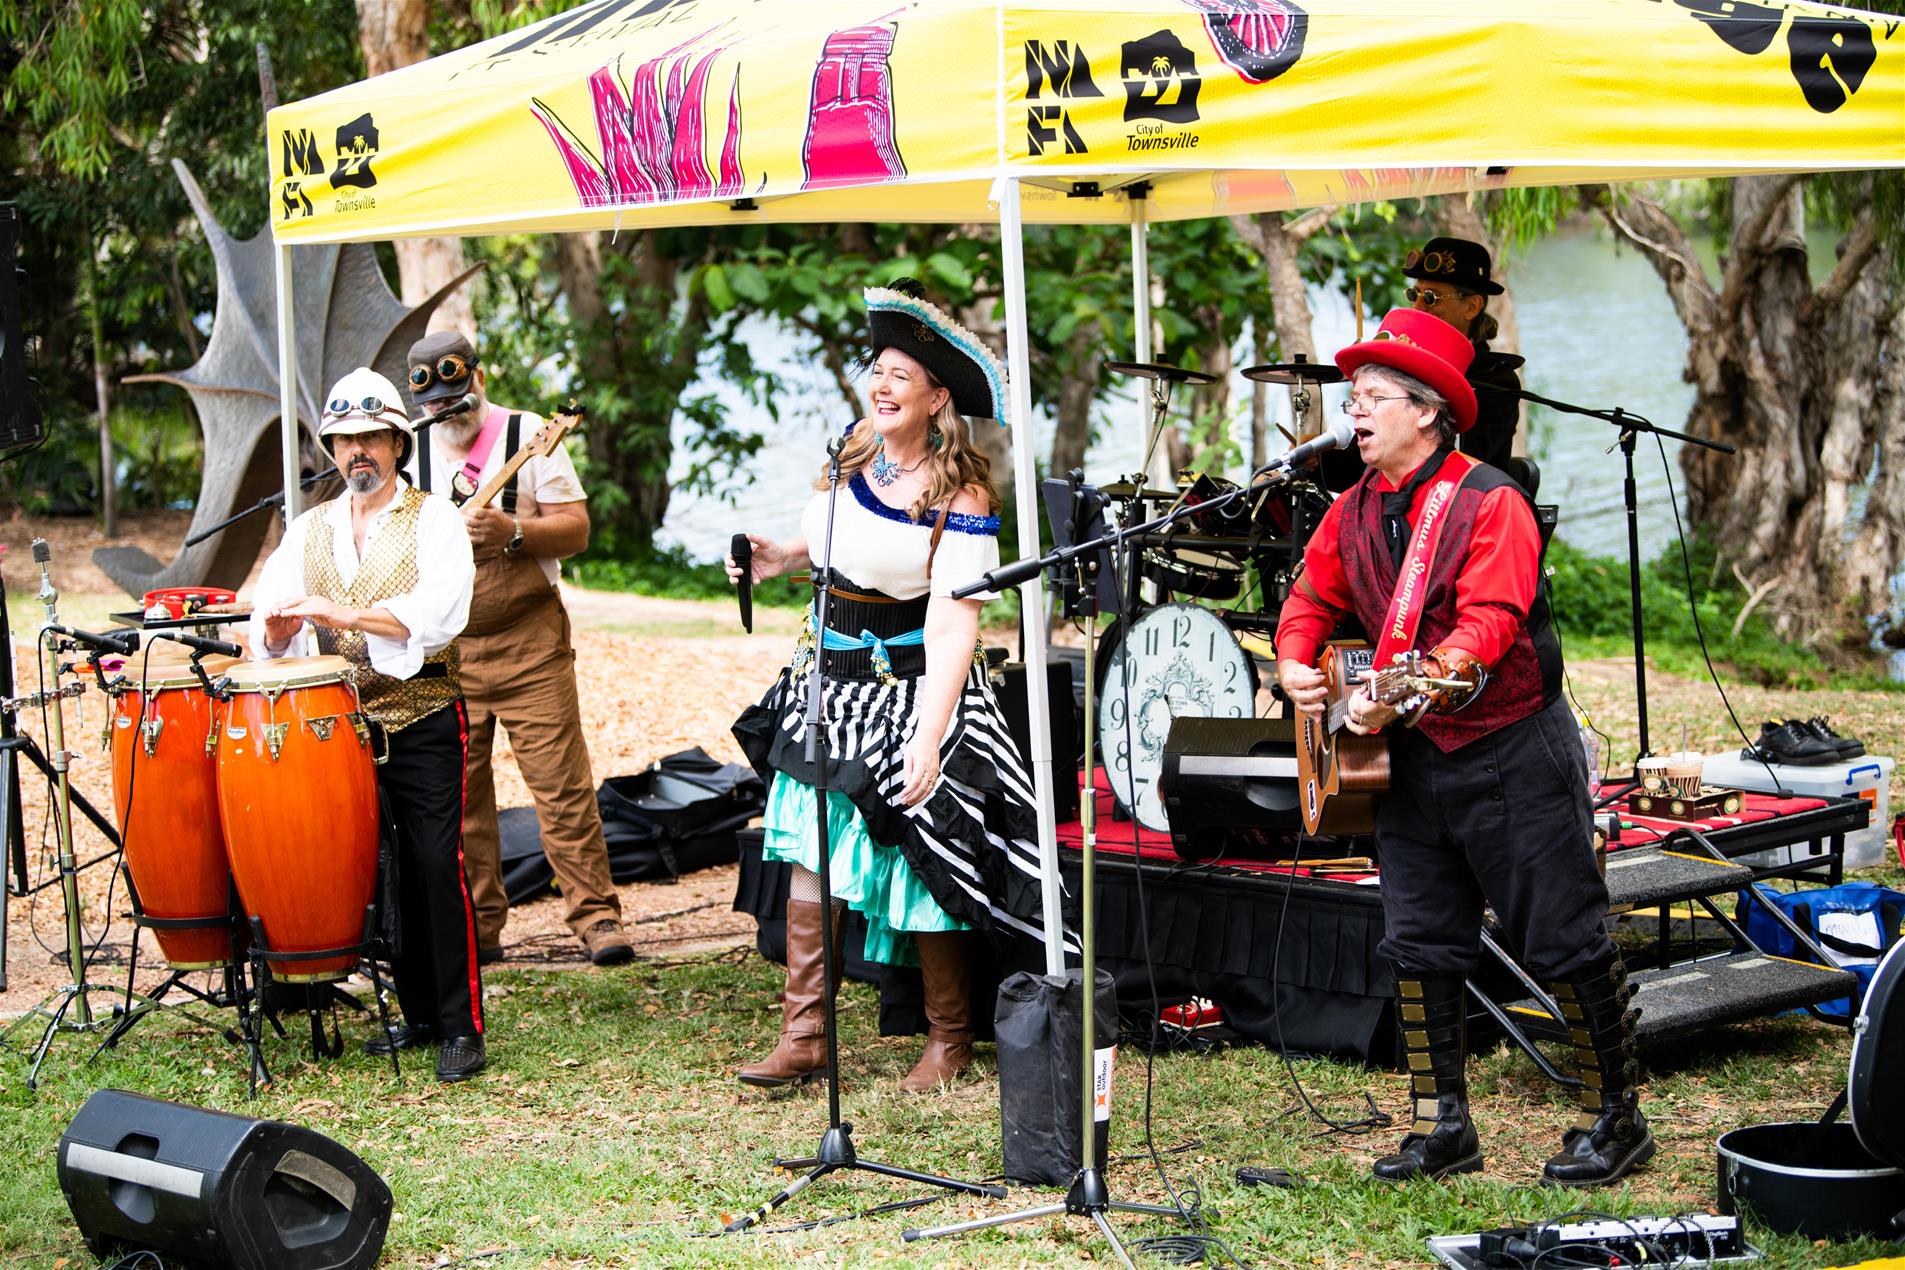 A band performing under a colourful tent at an outdoor event.